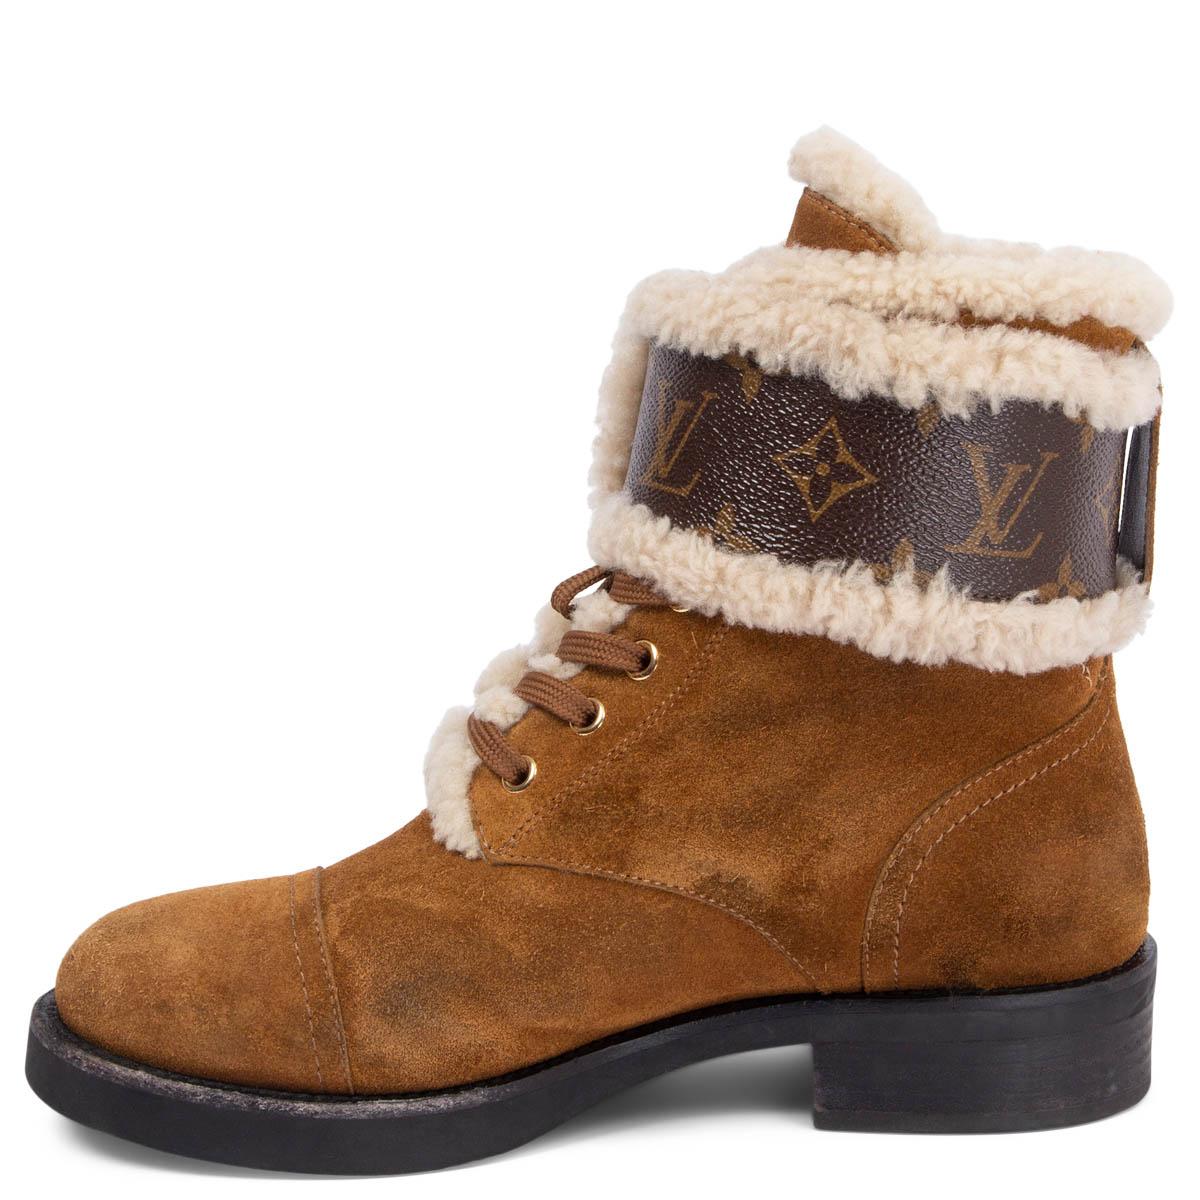 Brown LOUIS VUITTON camel brown suede RANGER WONDERLAND SHEARLING Boots Shoes 38.5 For Sale